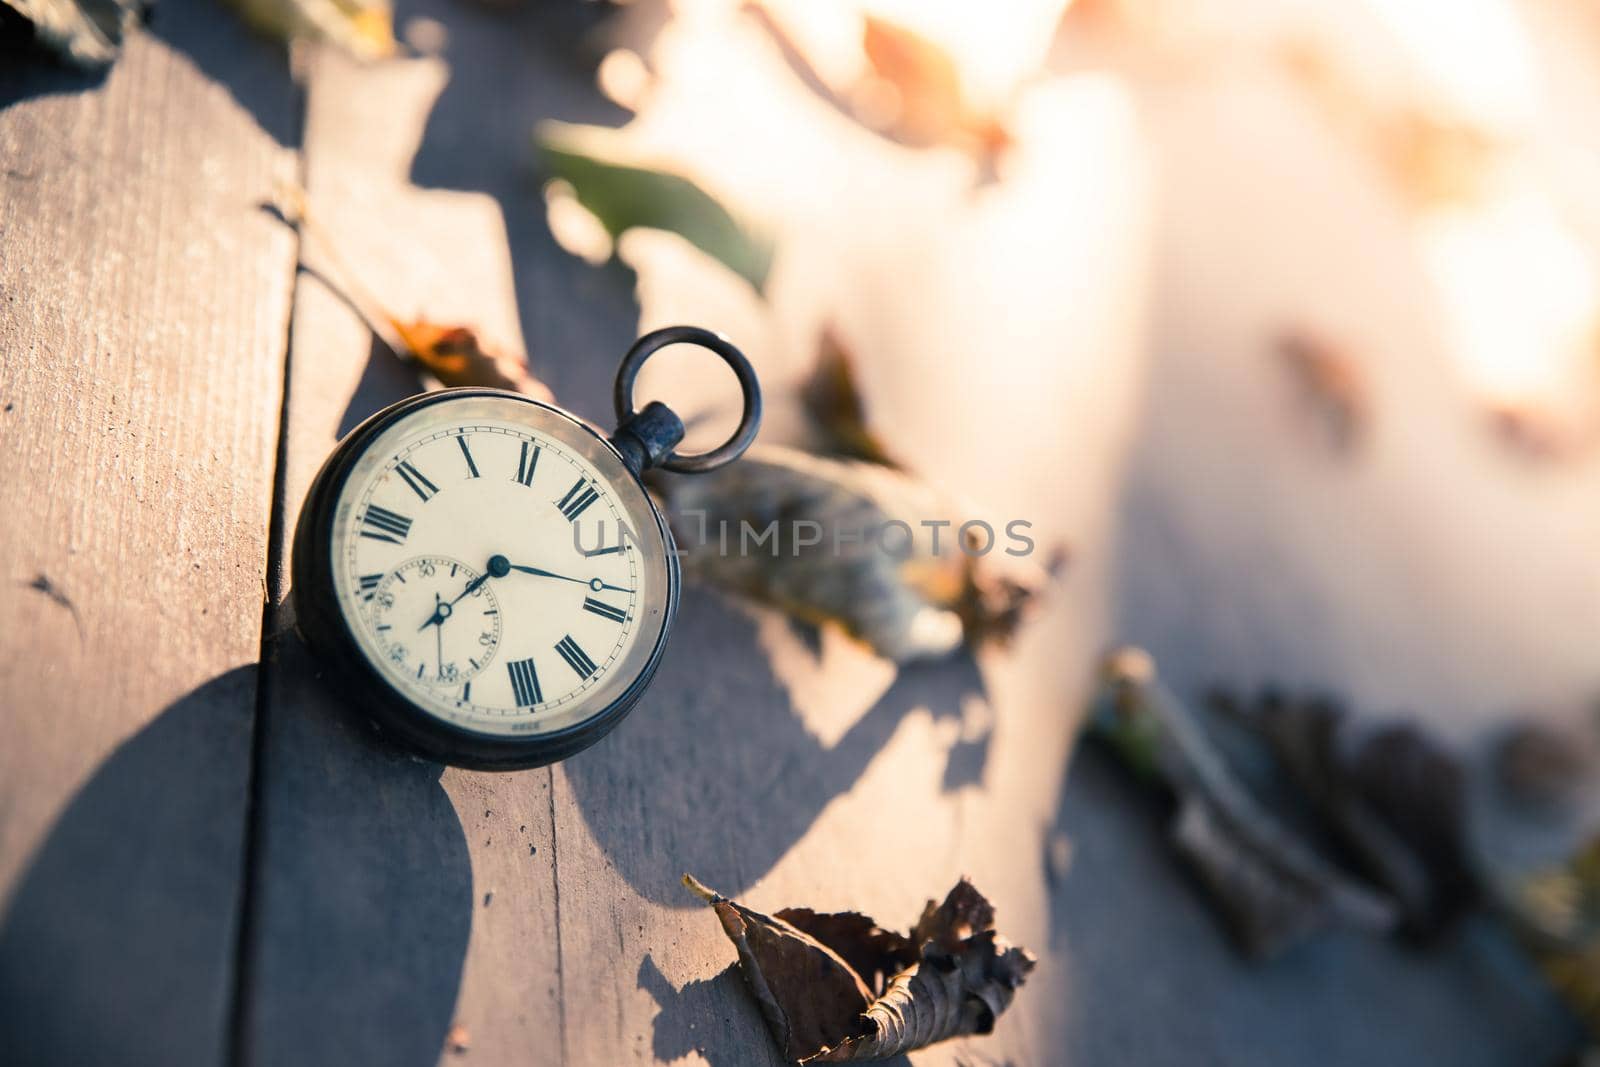 Time goes by: vintage watch outdoors; wood, leaves and sunshine; by Daxenbichler